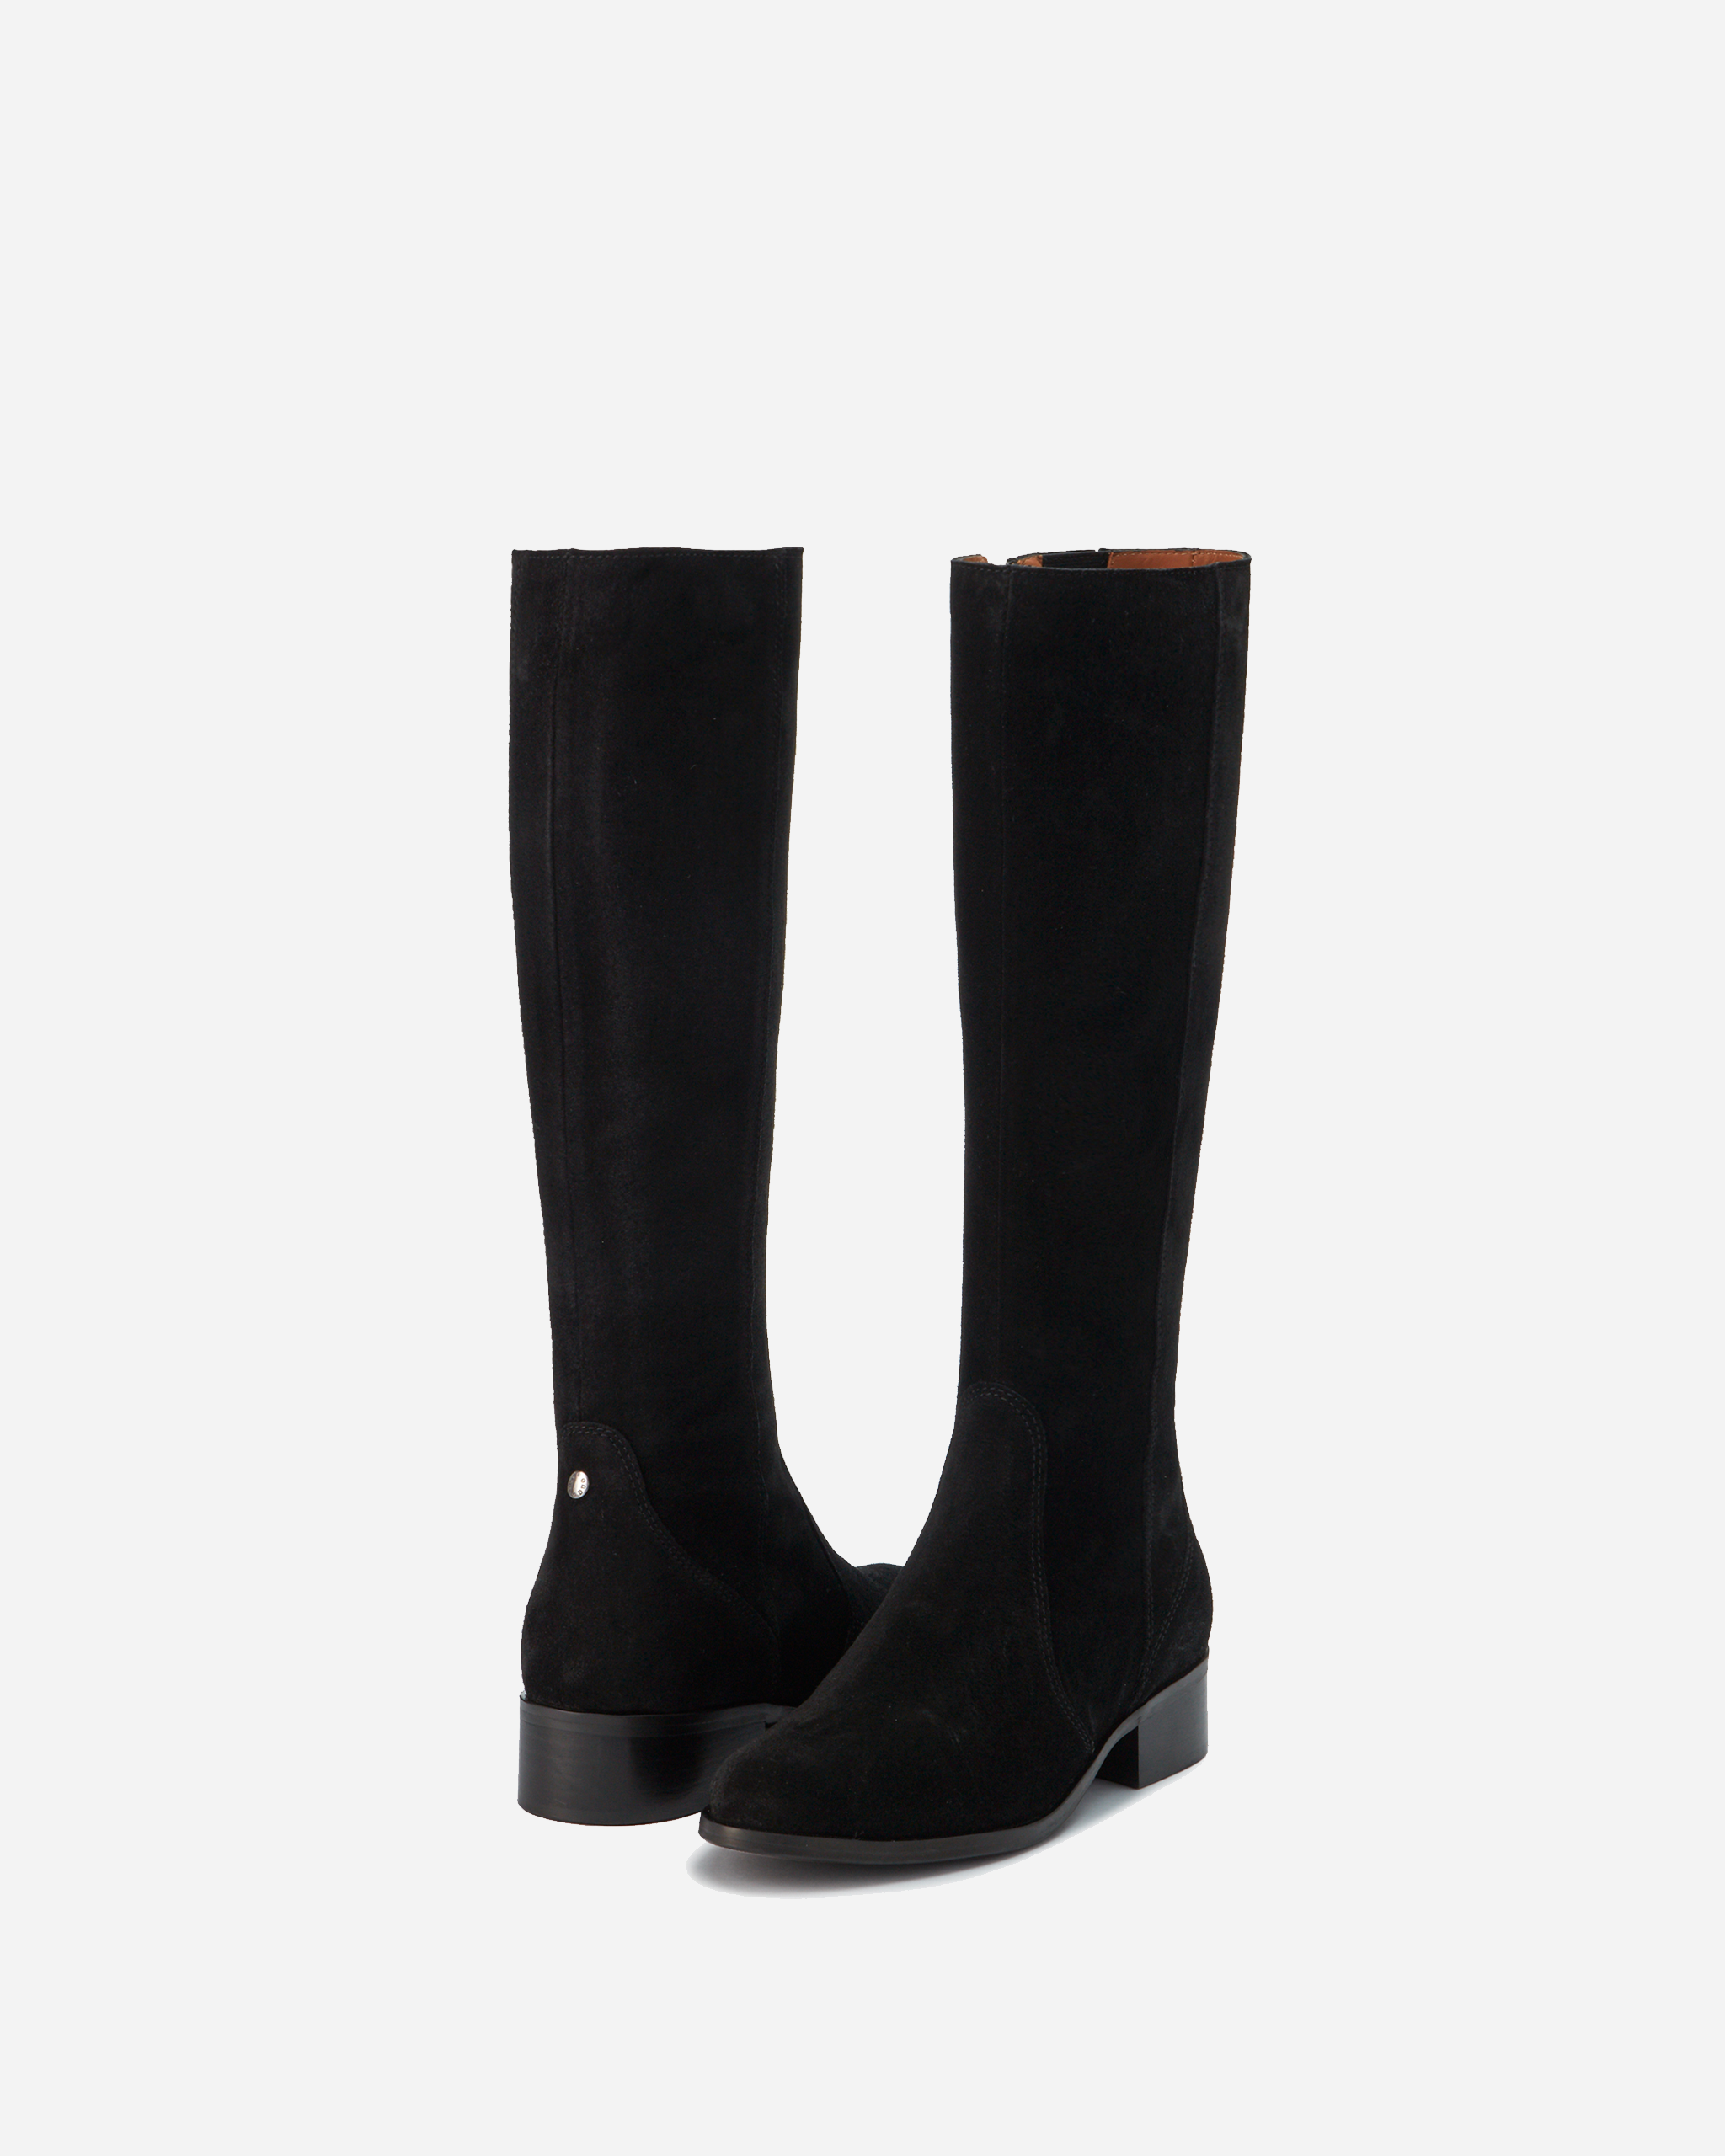 Knee high black suede boots